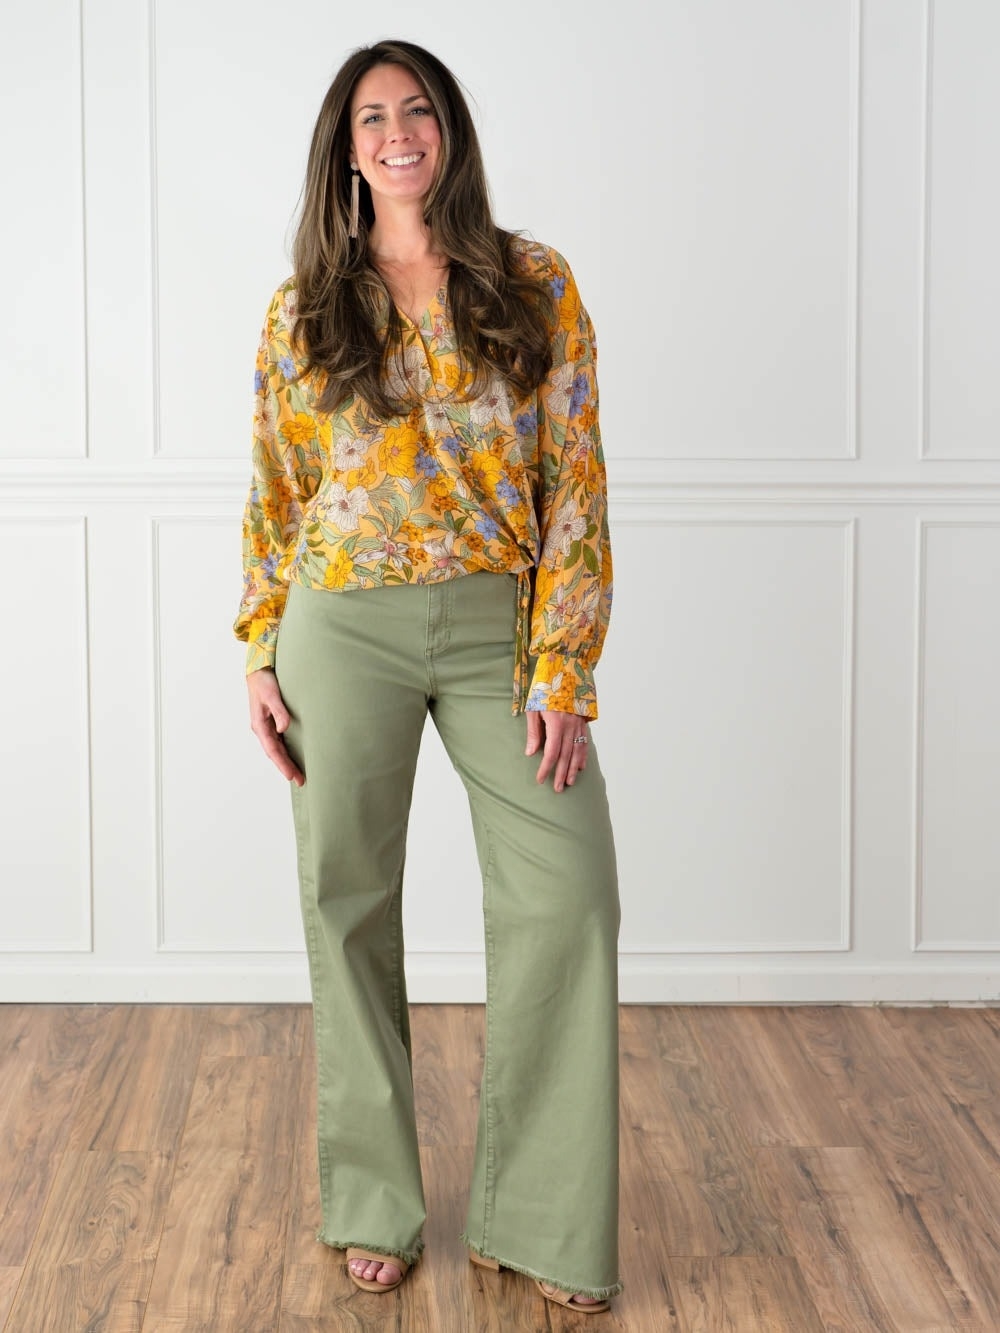 Woman in floral blouse and green trousers, standing with a smile, ideal for a shopping category